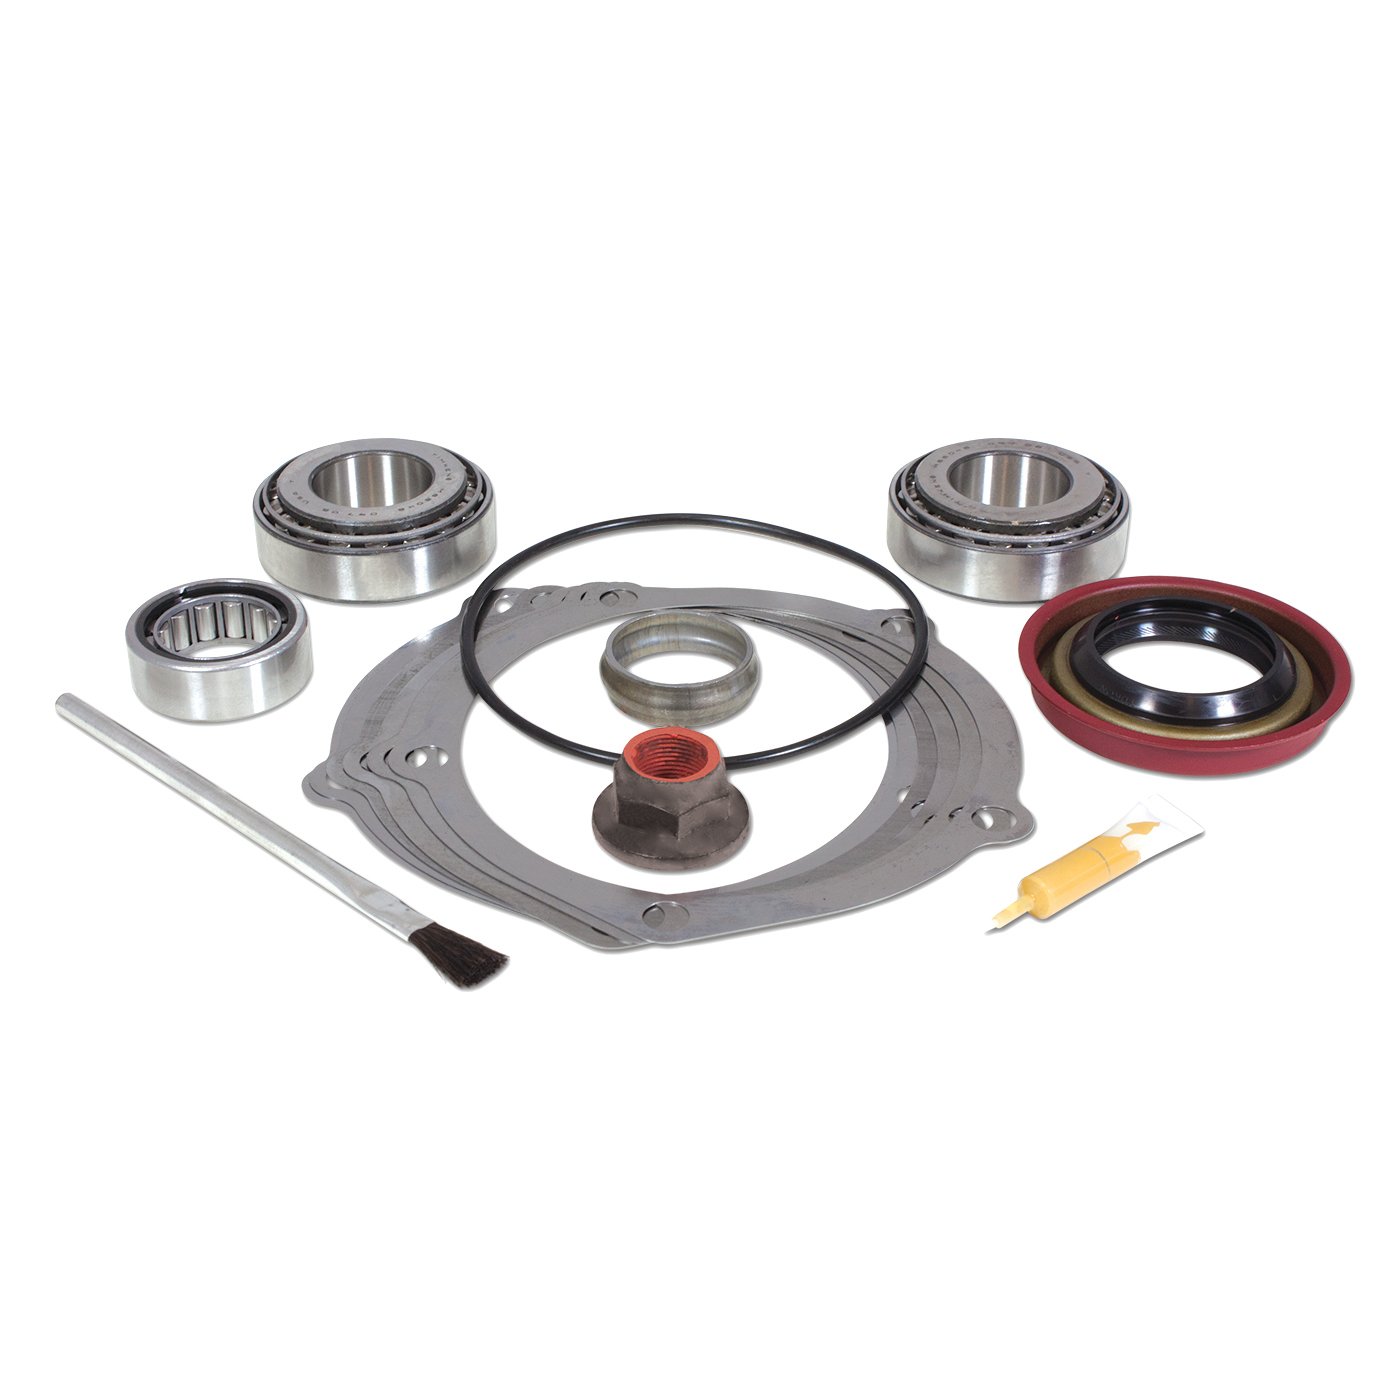 Pinion Install Kit For Ford Daytona 9 in. Differential